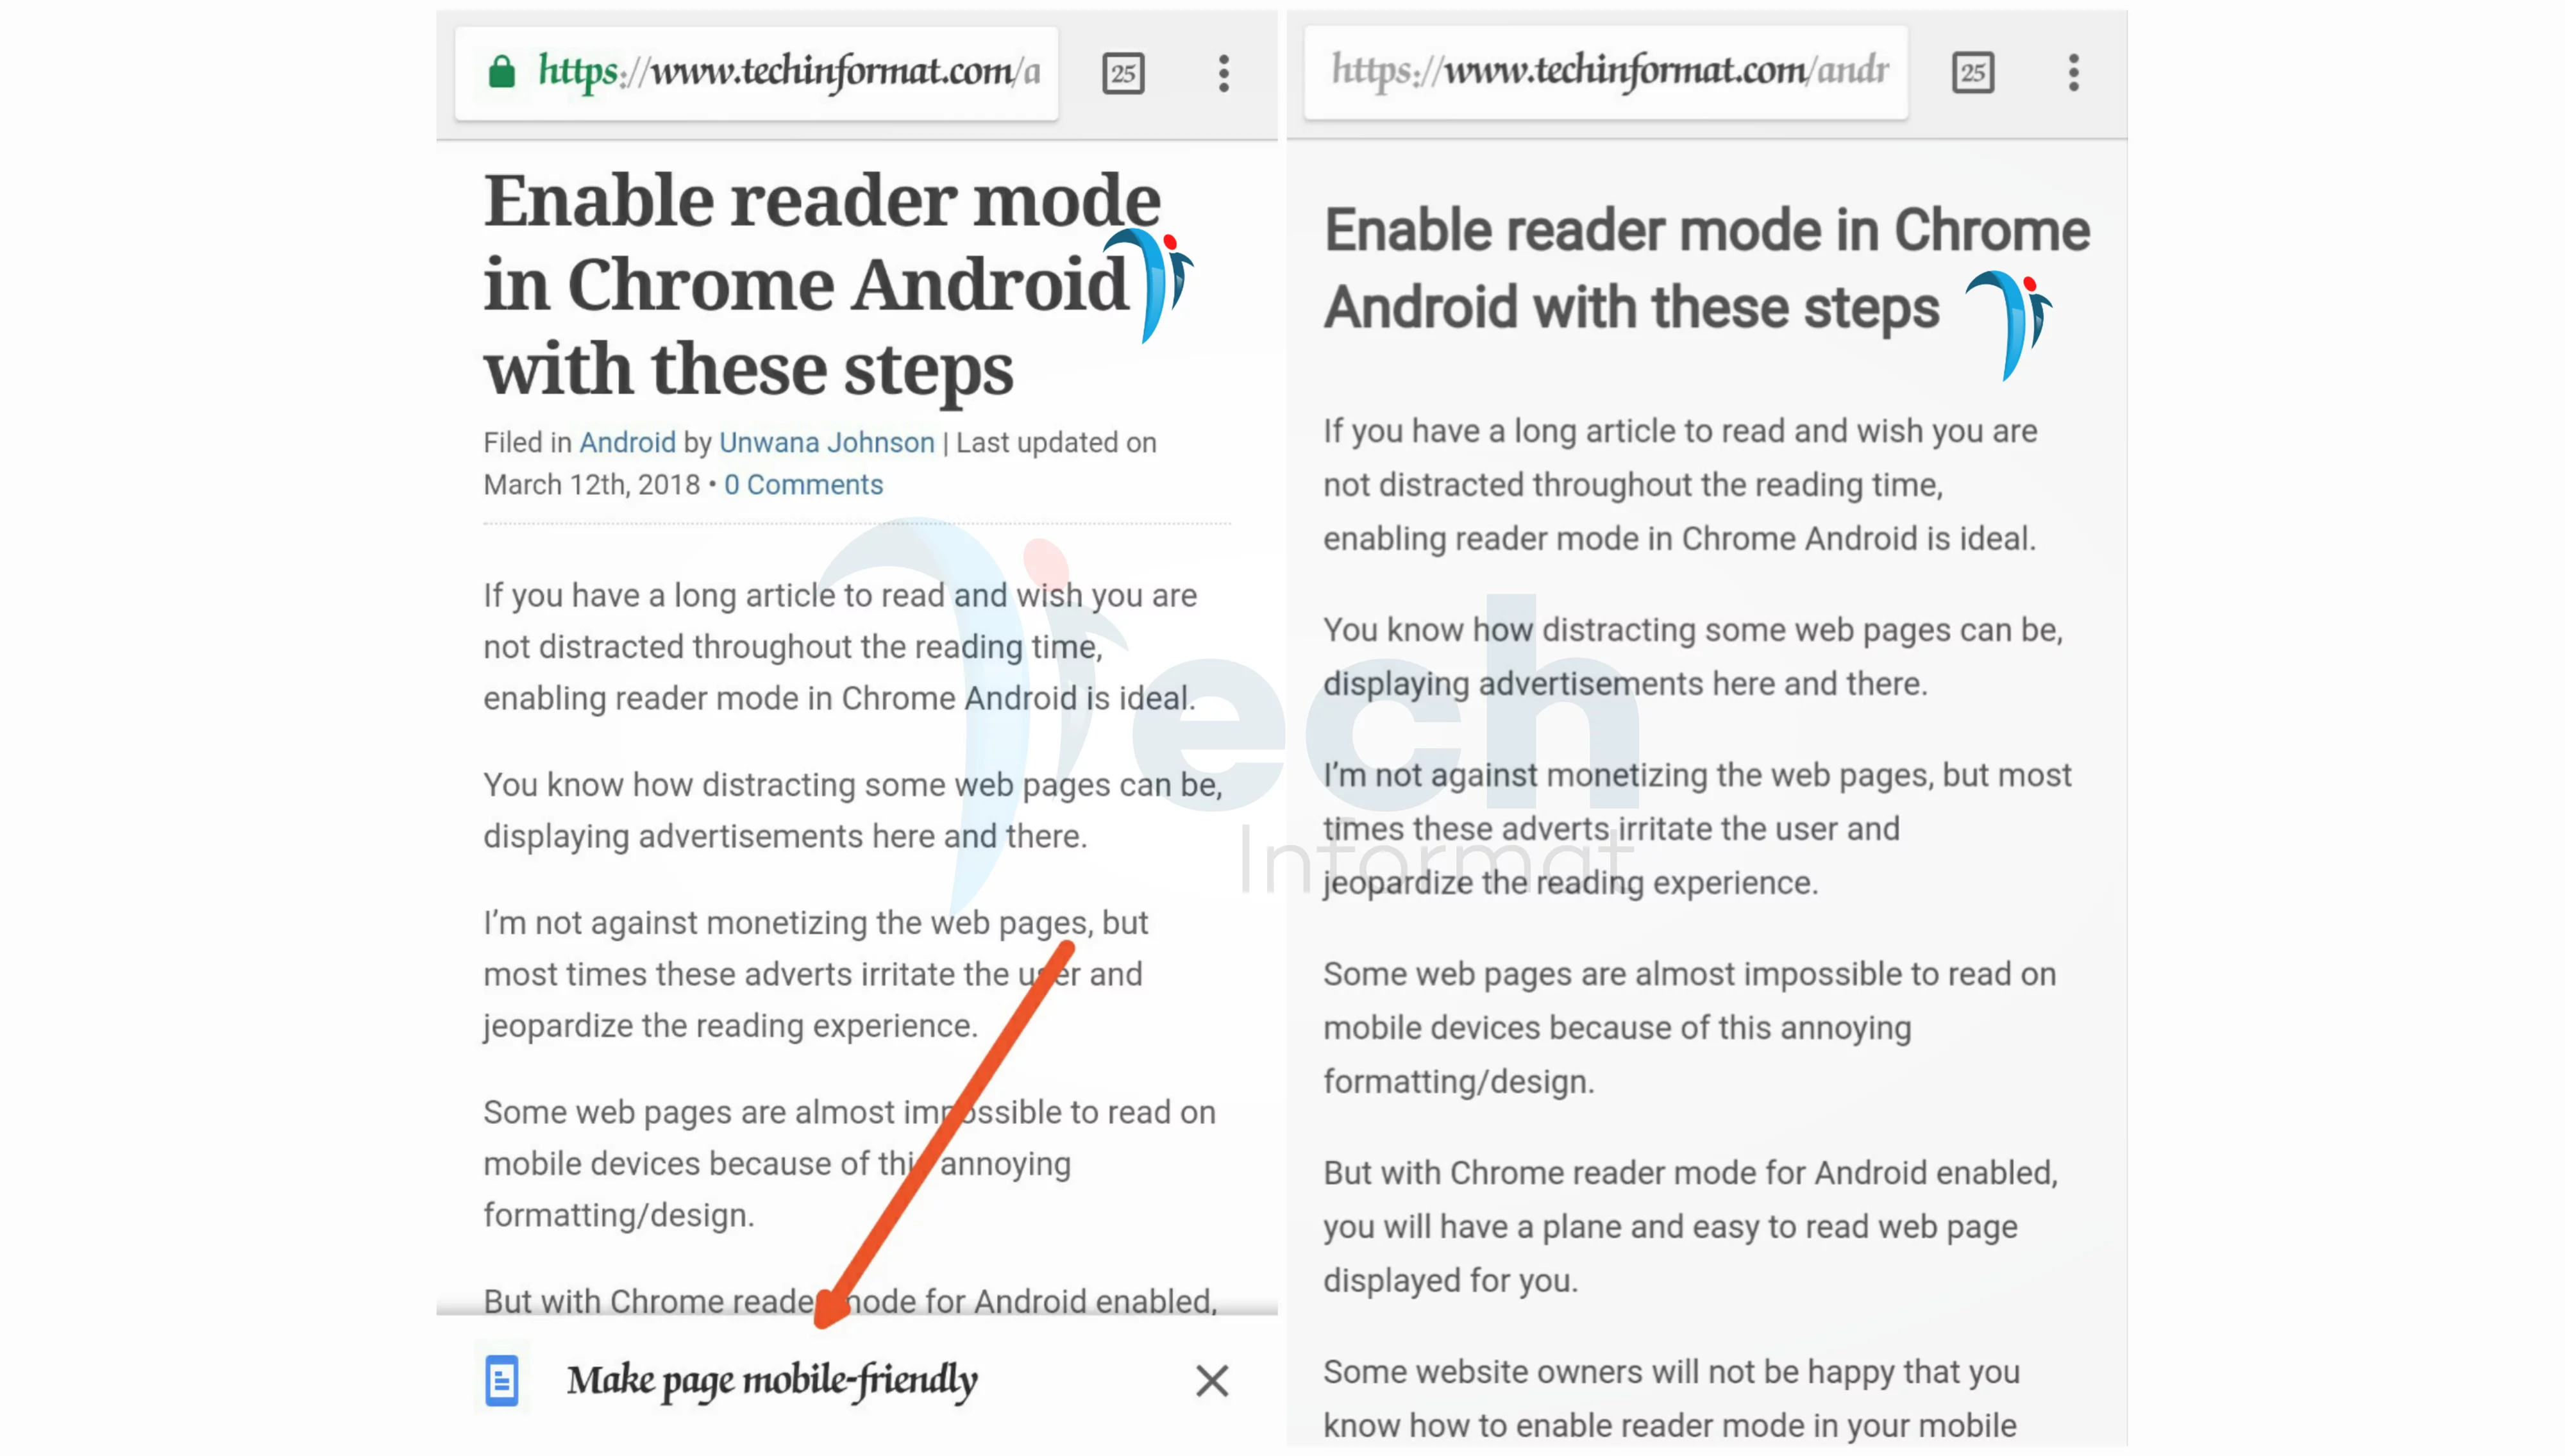 Enable reader mode in Chrome Android with these steps